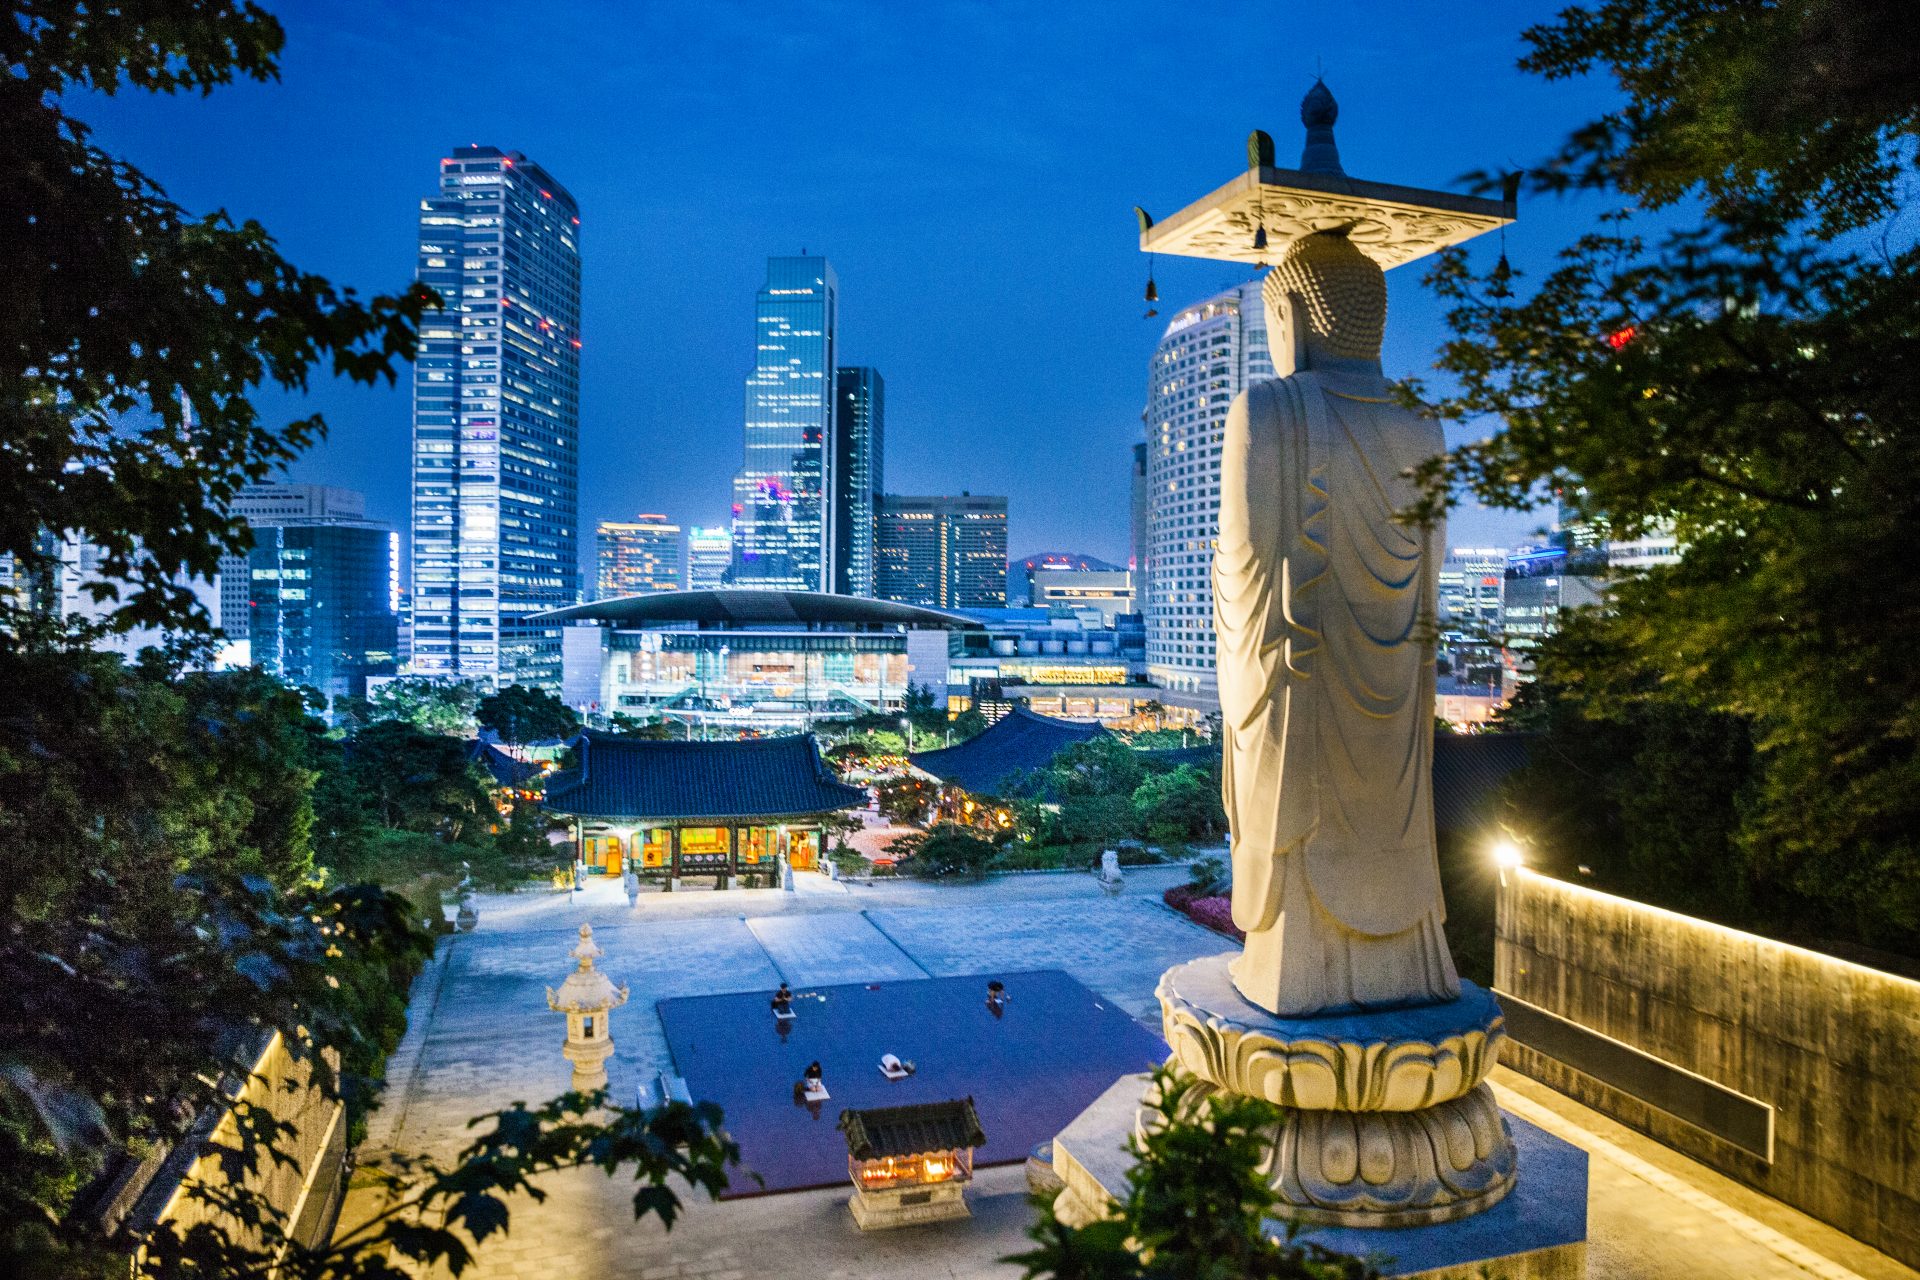 <p>Have you thought of going on vacation to South Korea? It's a country where you can enjoy historical cultural heritage and delicious gourmet food, beauty salons, massages, popular cosmetics, and shopping. Let's take a look at some tourist attractions in Korea.</p>